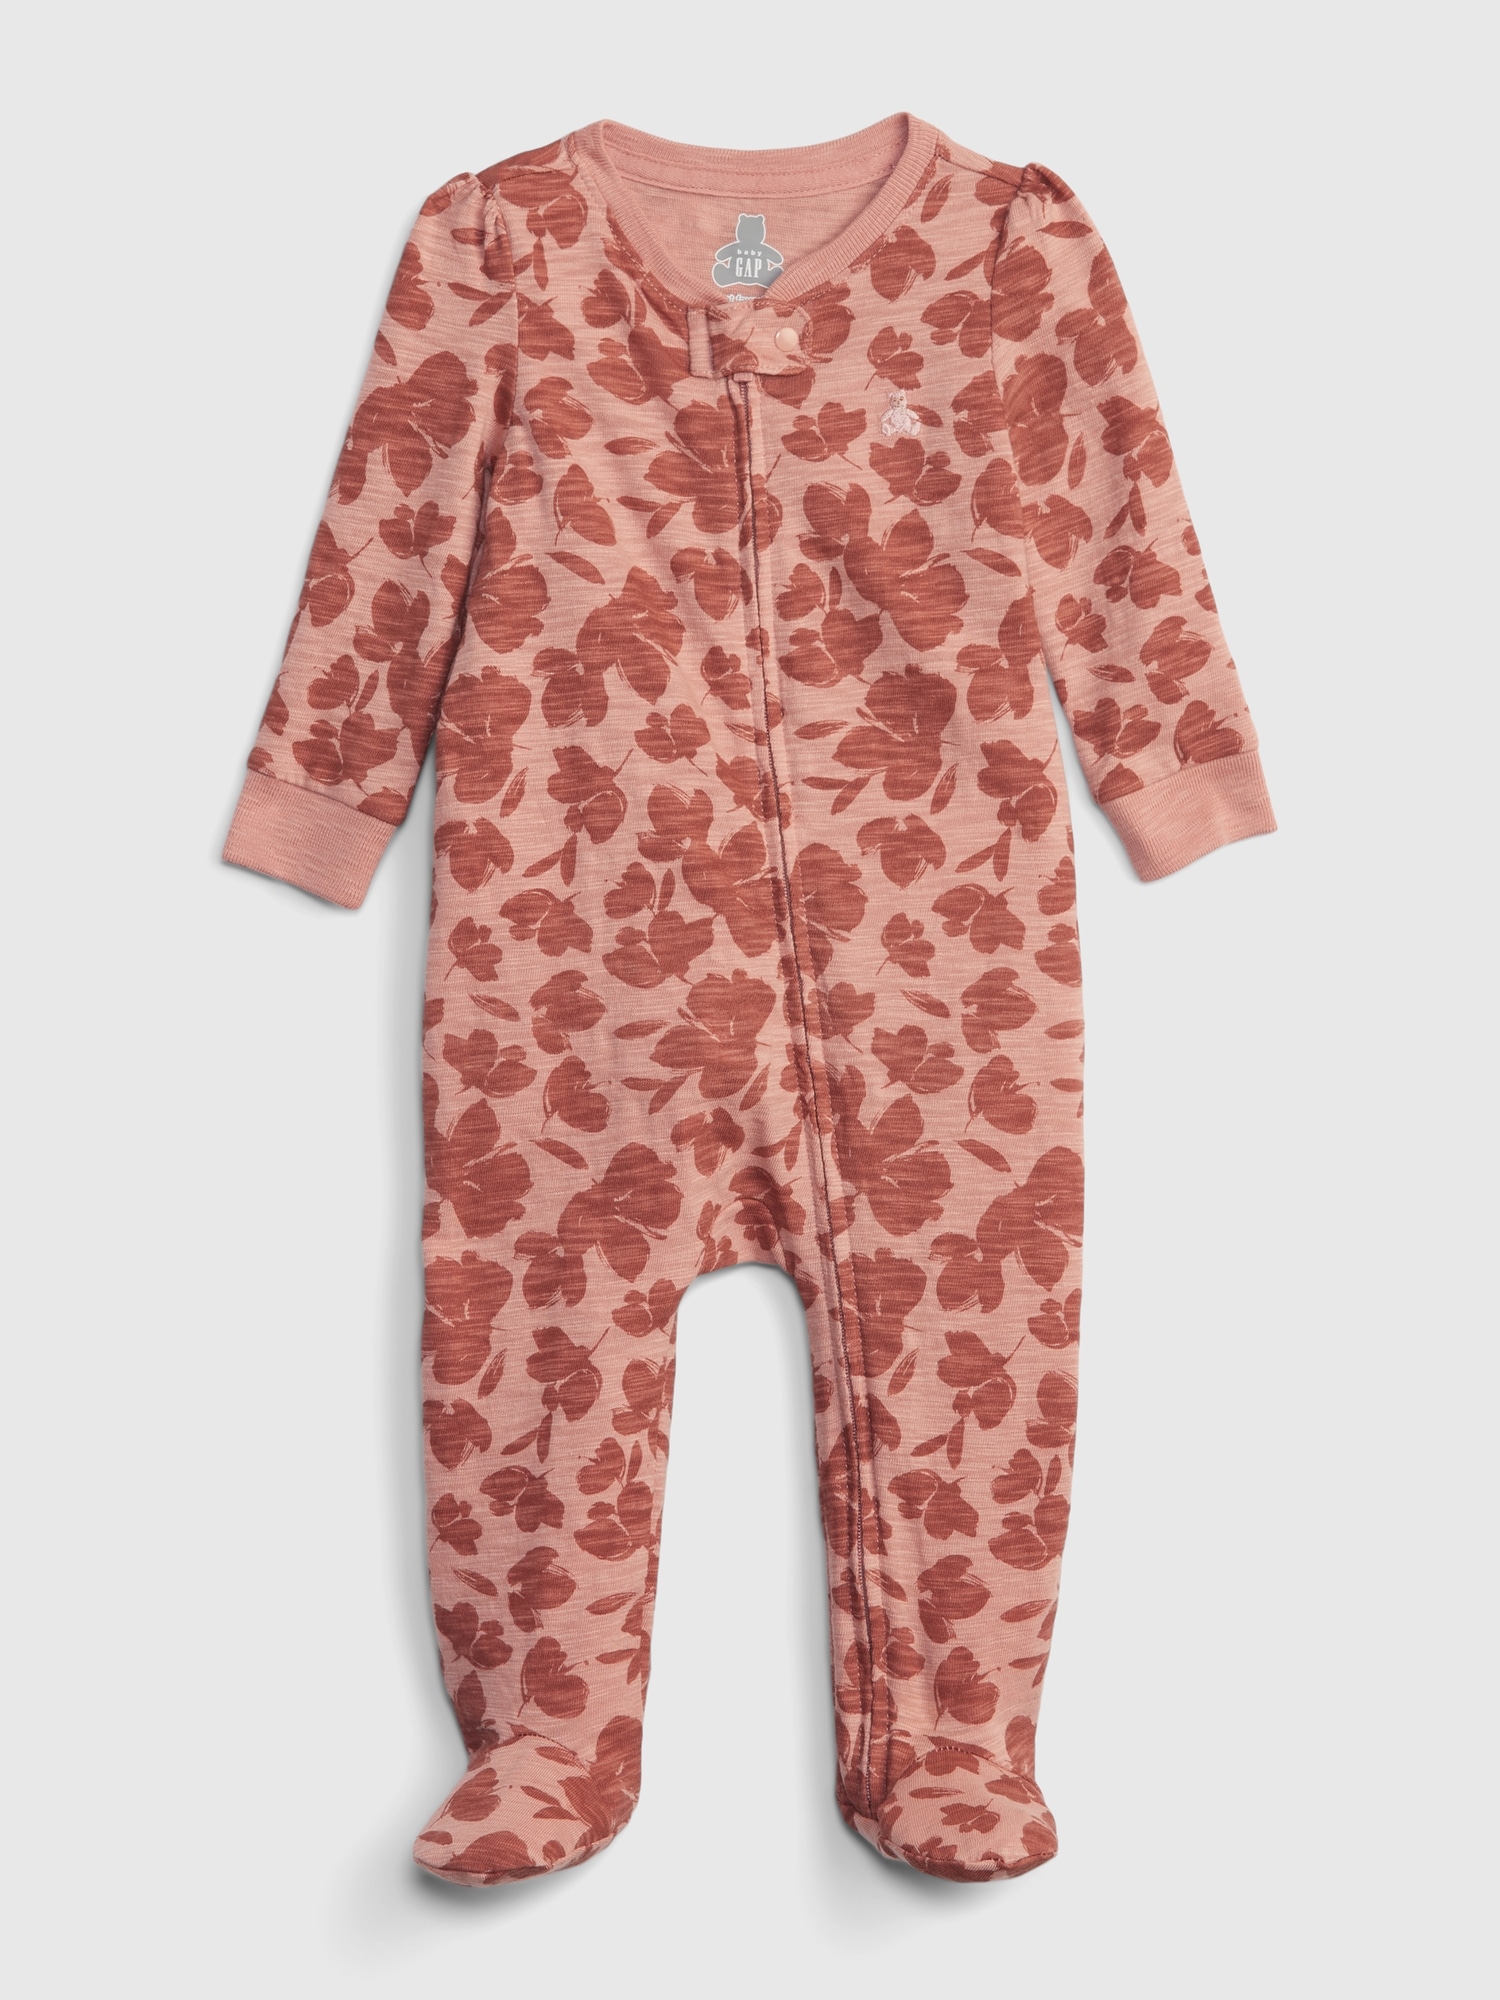 GAP Baby Patterned Overall - Boys